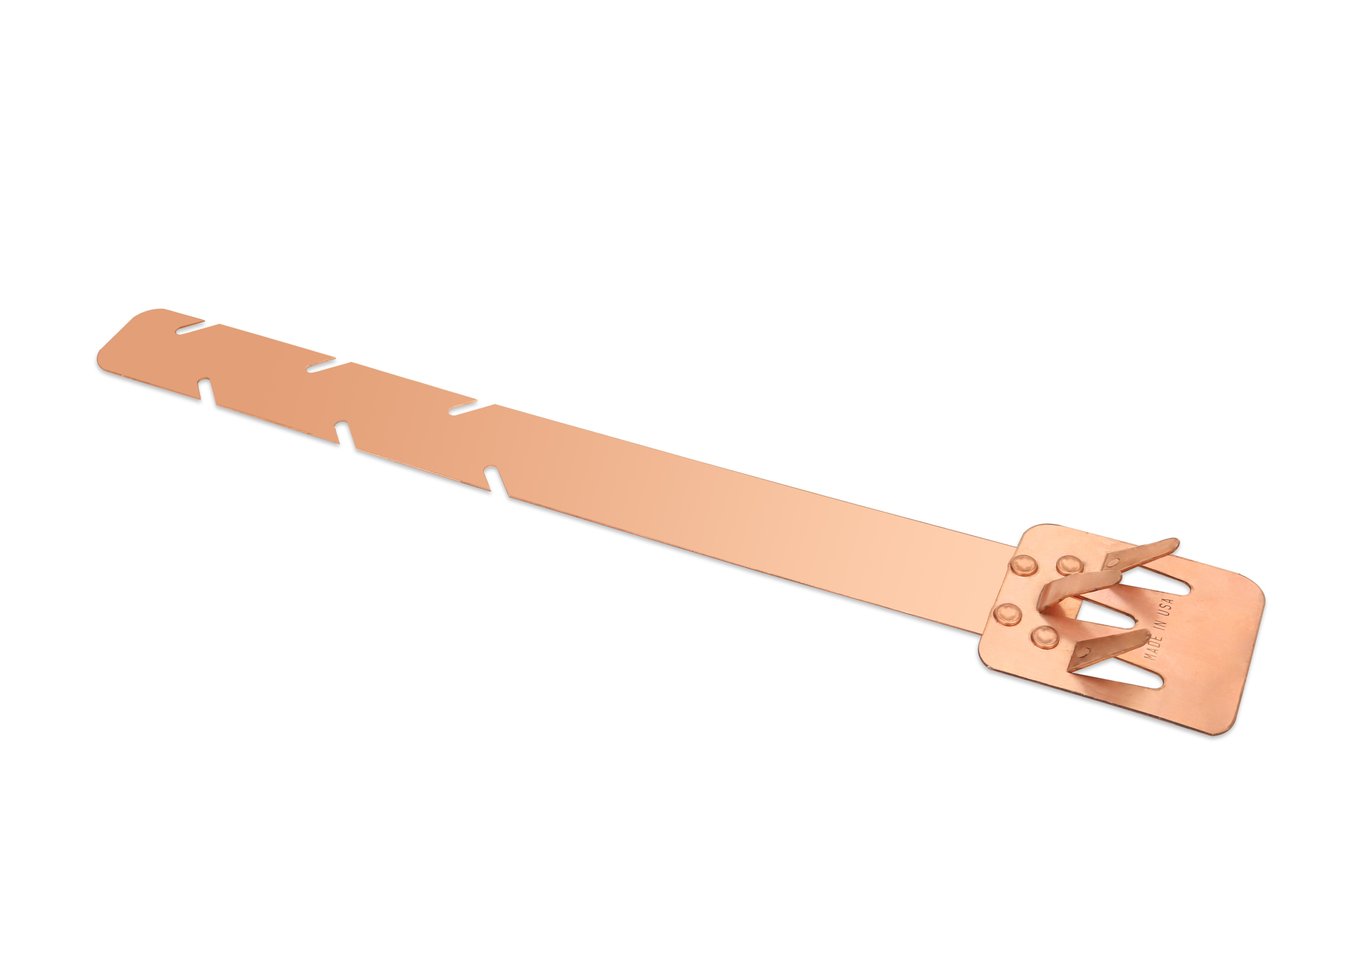 Copper clip with strap for self-regulating roof and gutter deicing